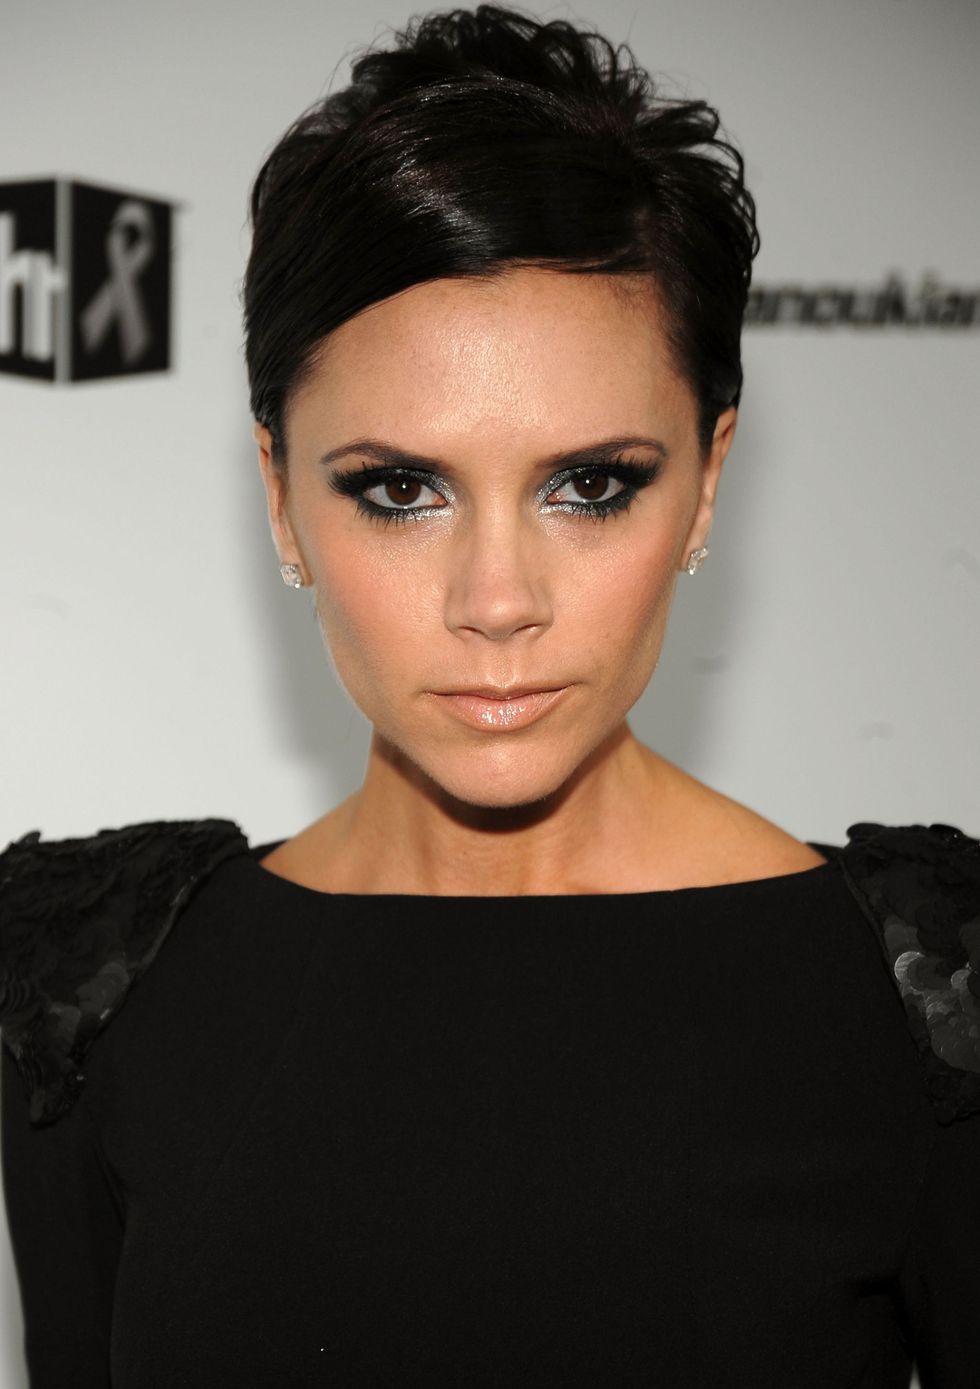 WEST HOLLYWOOD, CA - FEBRUARY 22:  Victoria Beckham arrives at the 17th Annual Elton John AIDS Foundation Oscar party held at the Pacific Design Center on February 22, 2009 in West Hollywood, California.  (Photo by Jamie McCarthy/WireImage) 